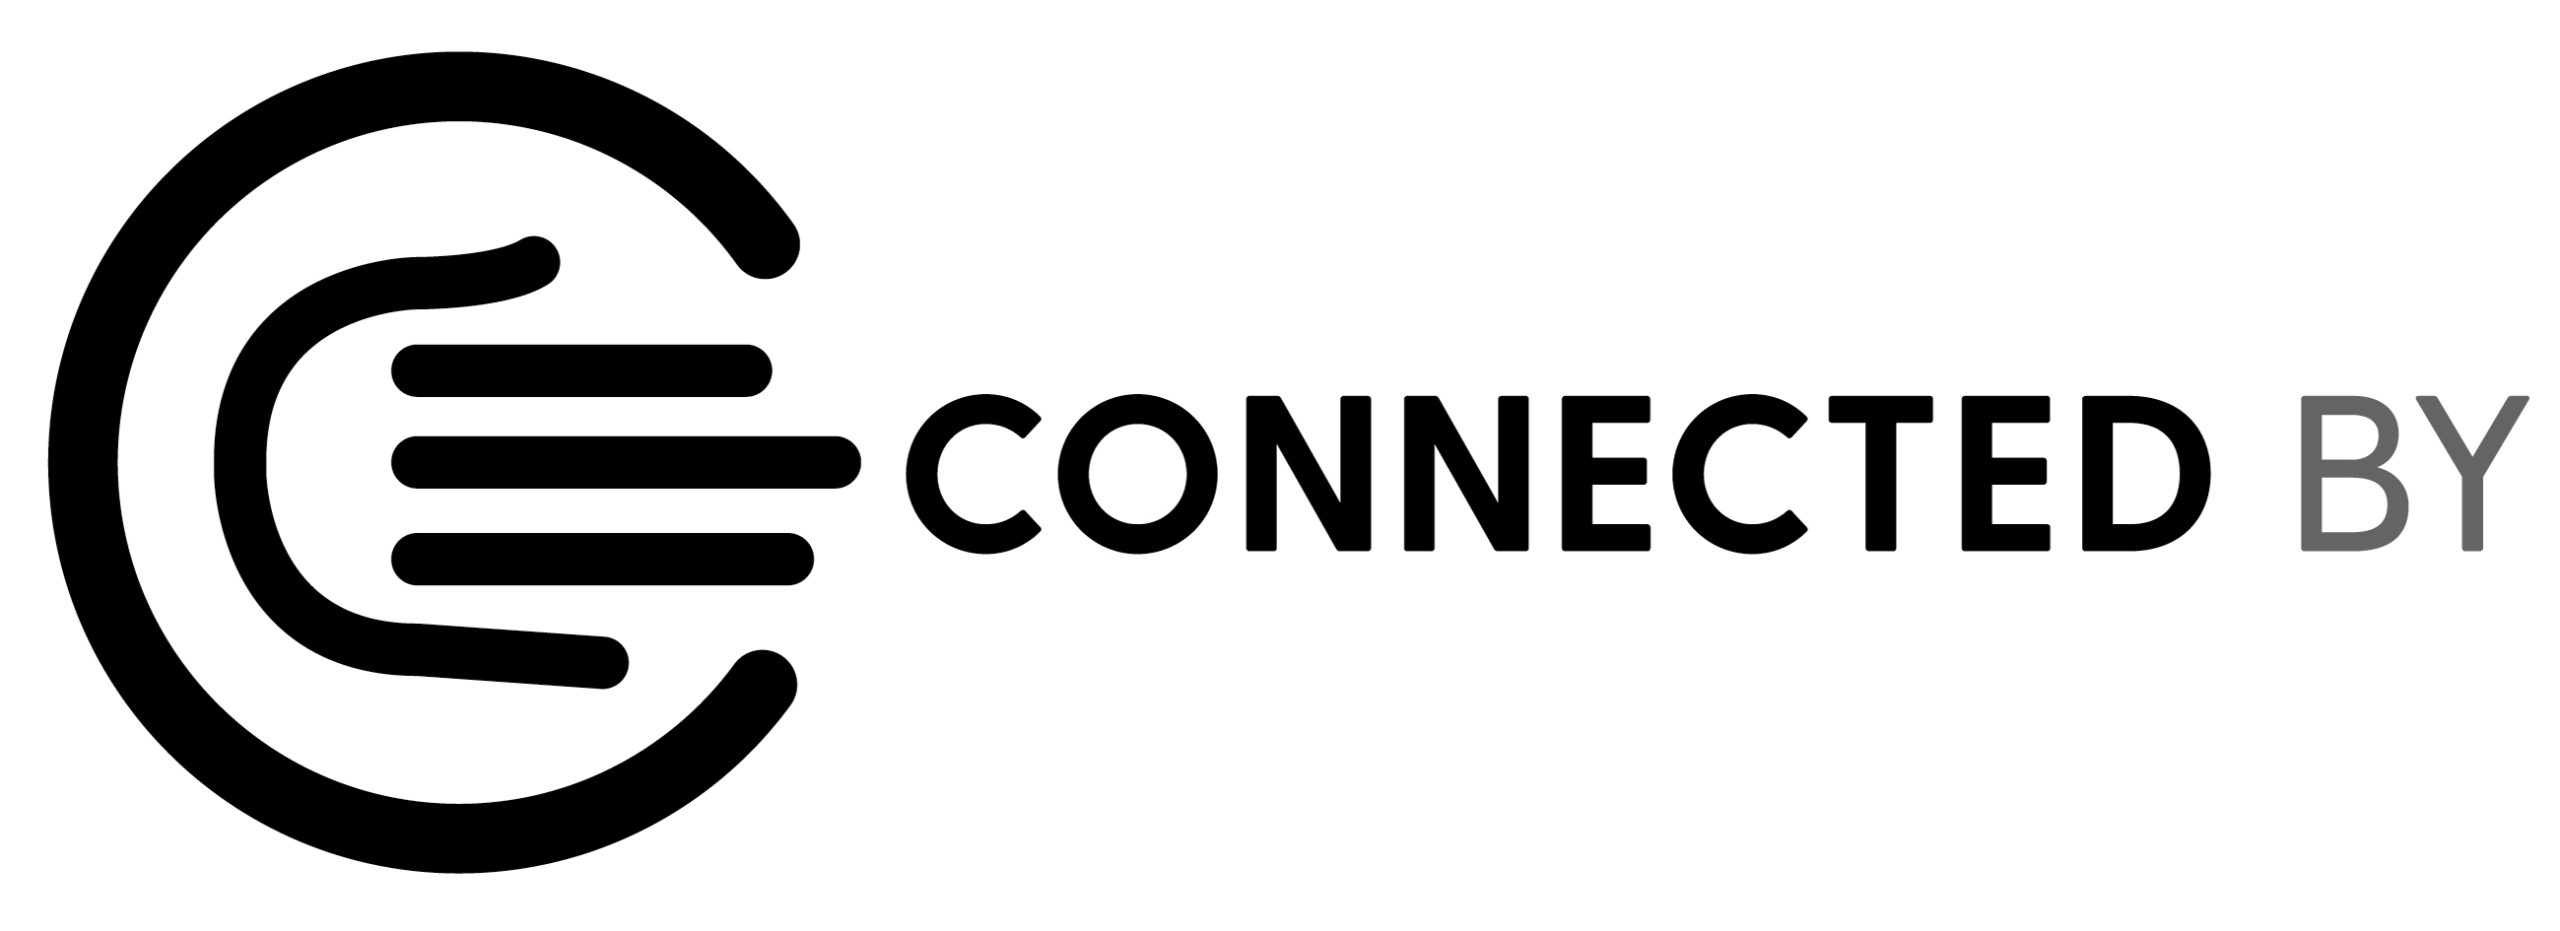 Connected By Inc